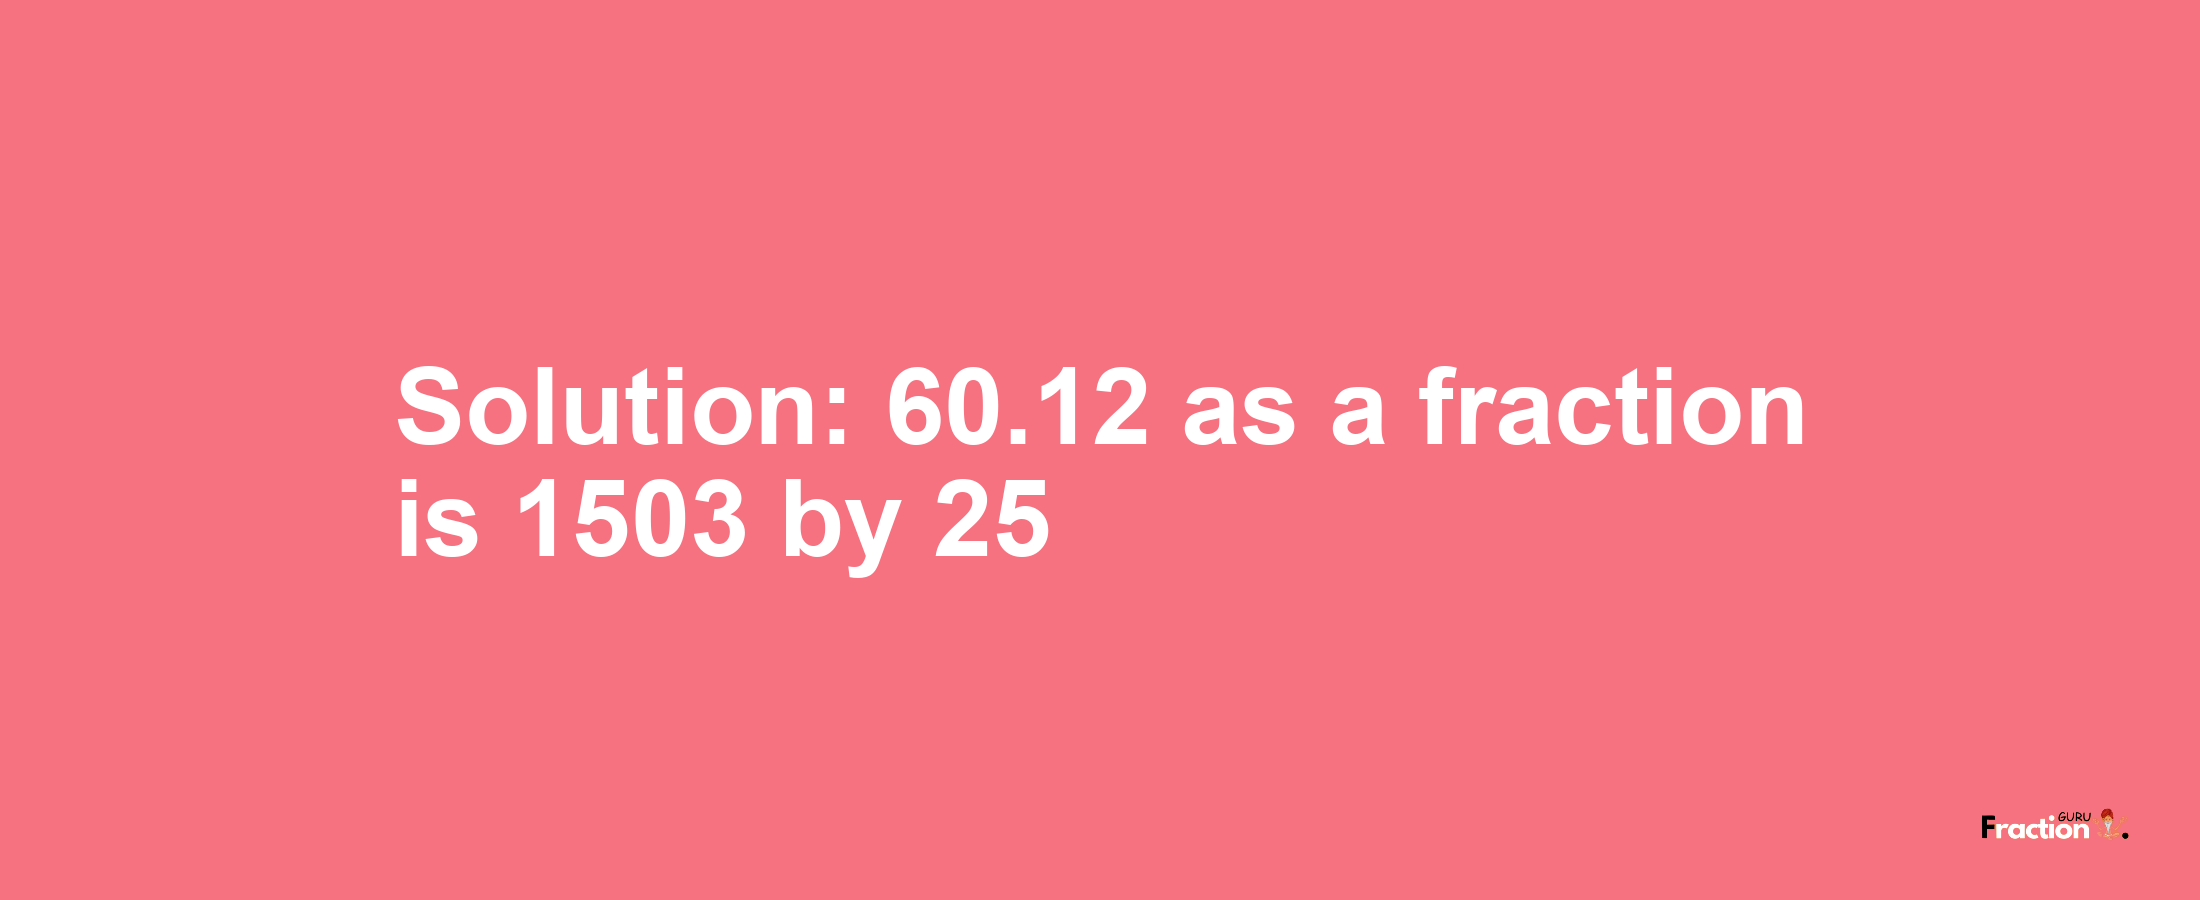 Solution:60.12 as a fraction is 1503/25